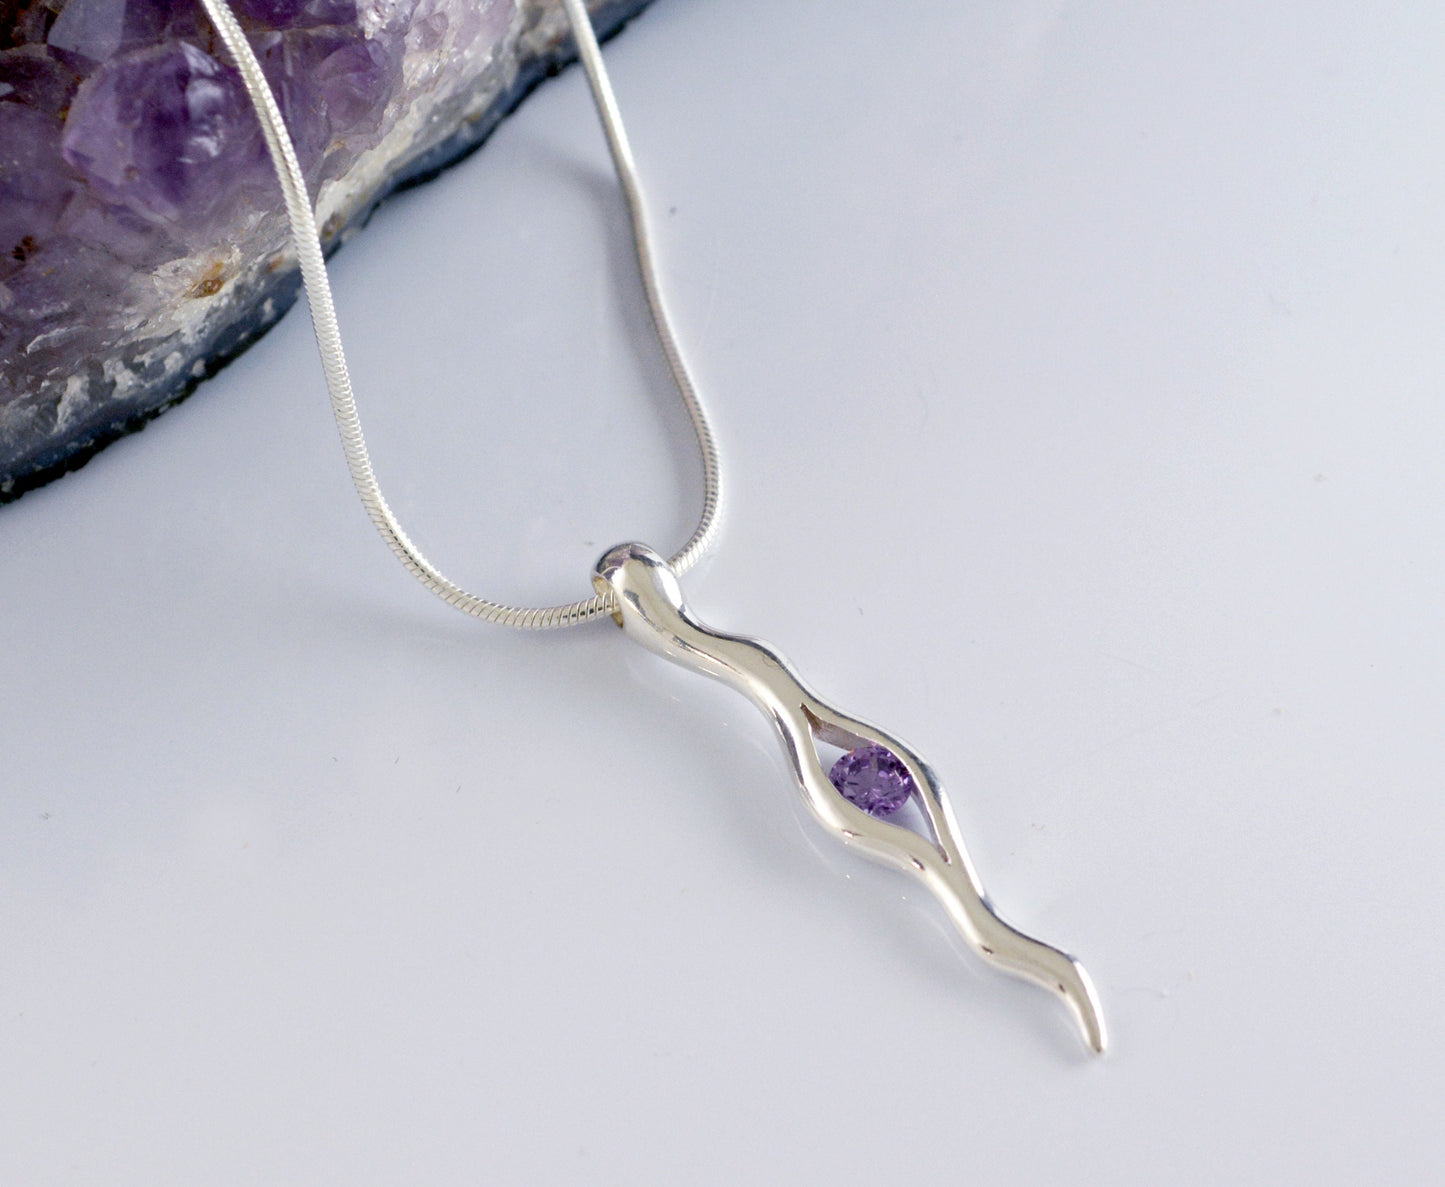 Earrings and eye pendant set, handmade in solid silver and set with a top quality synthetic stone or natural stones